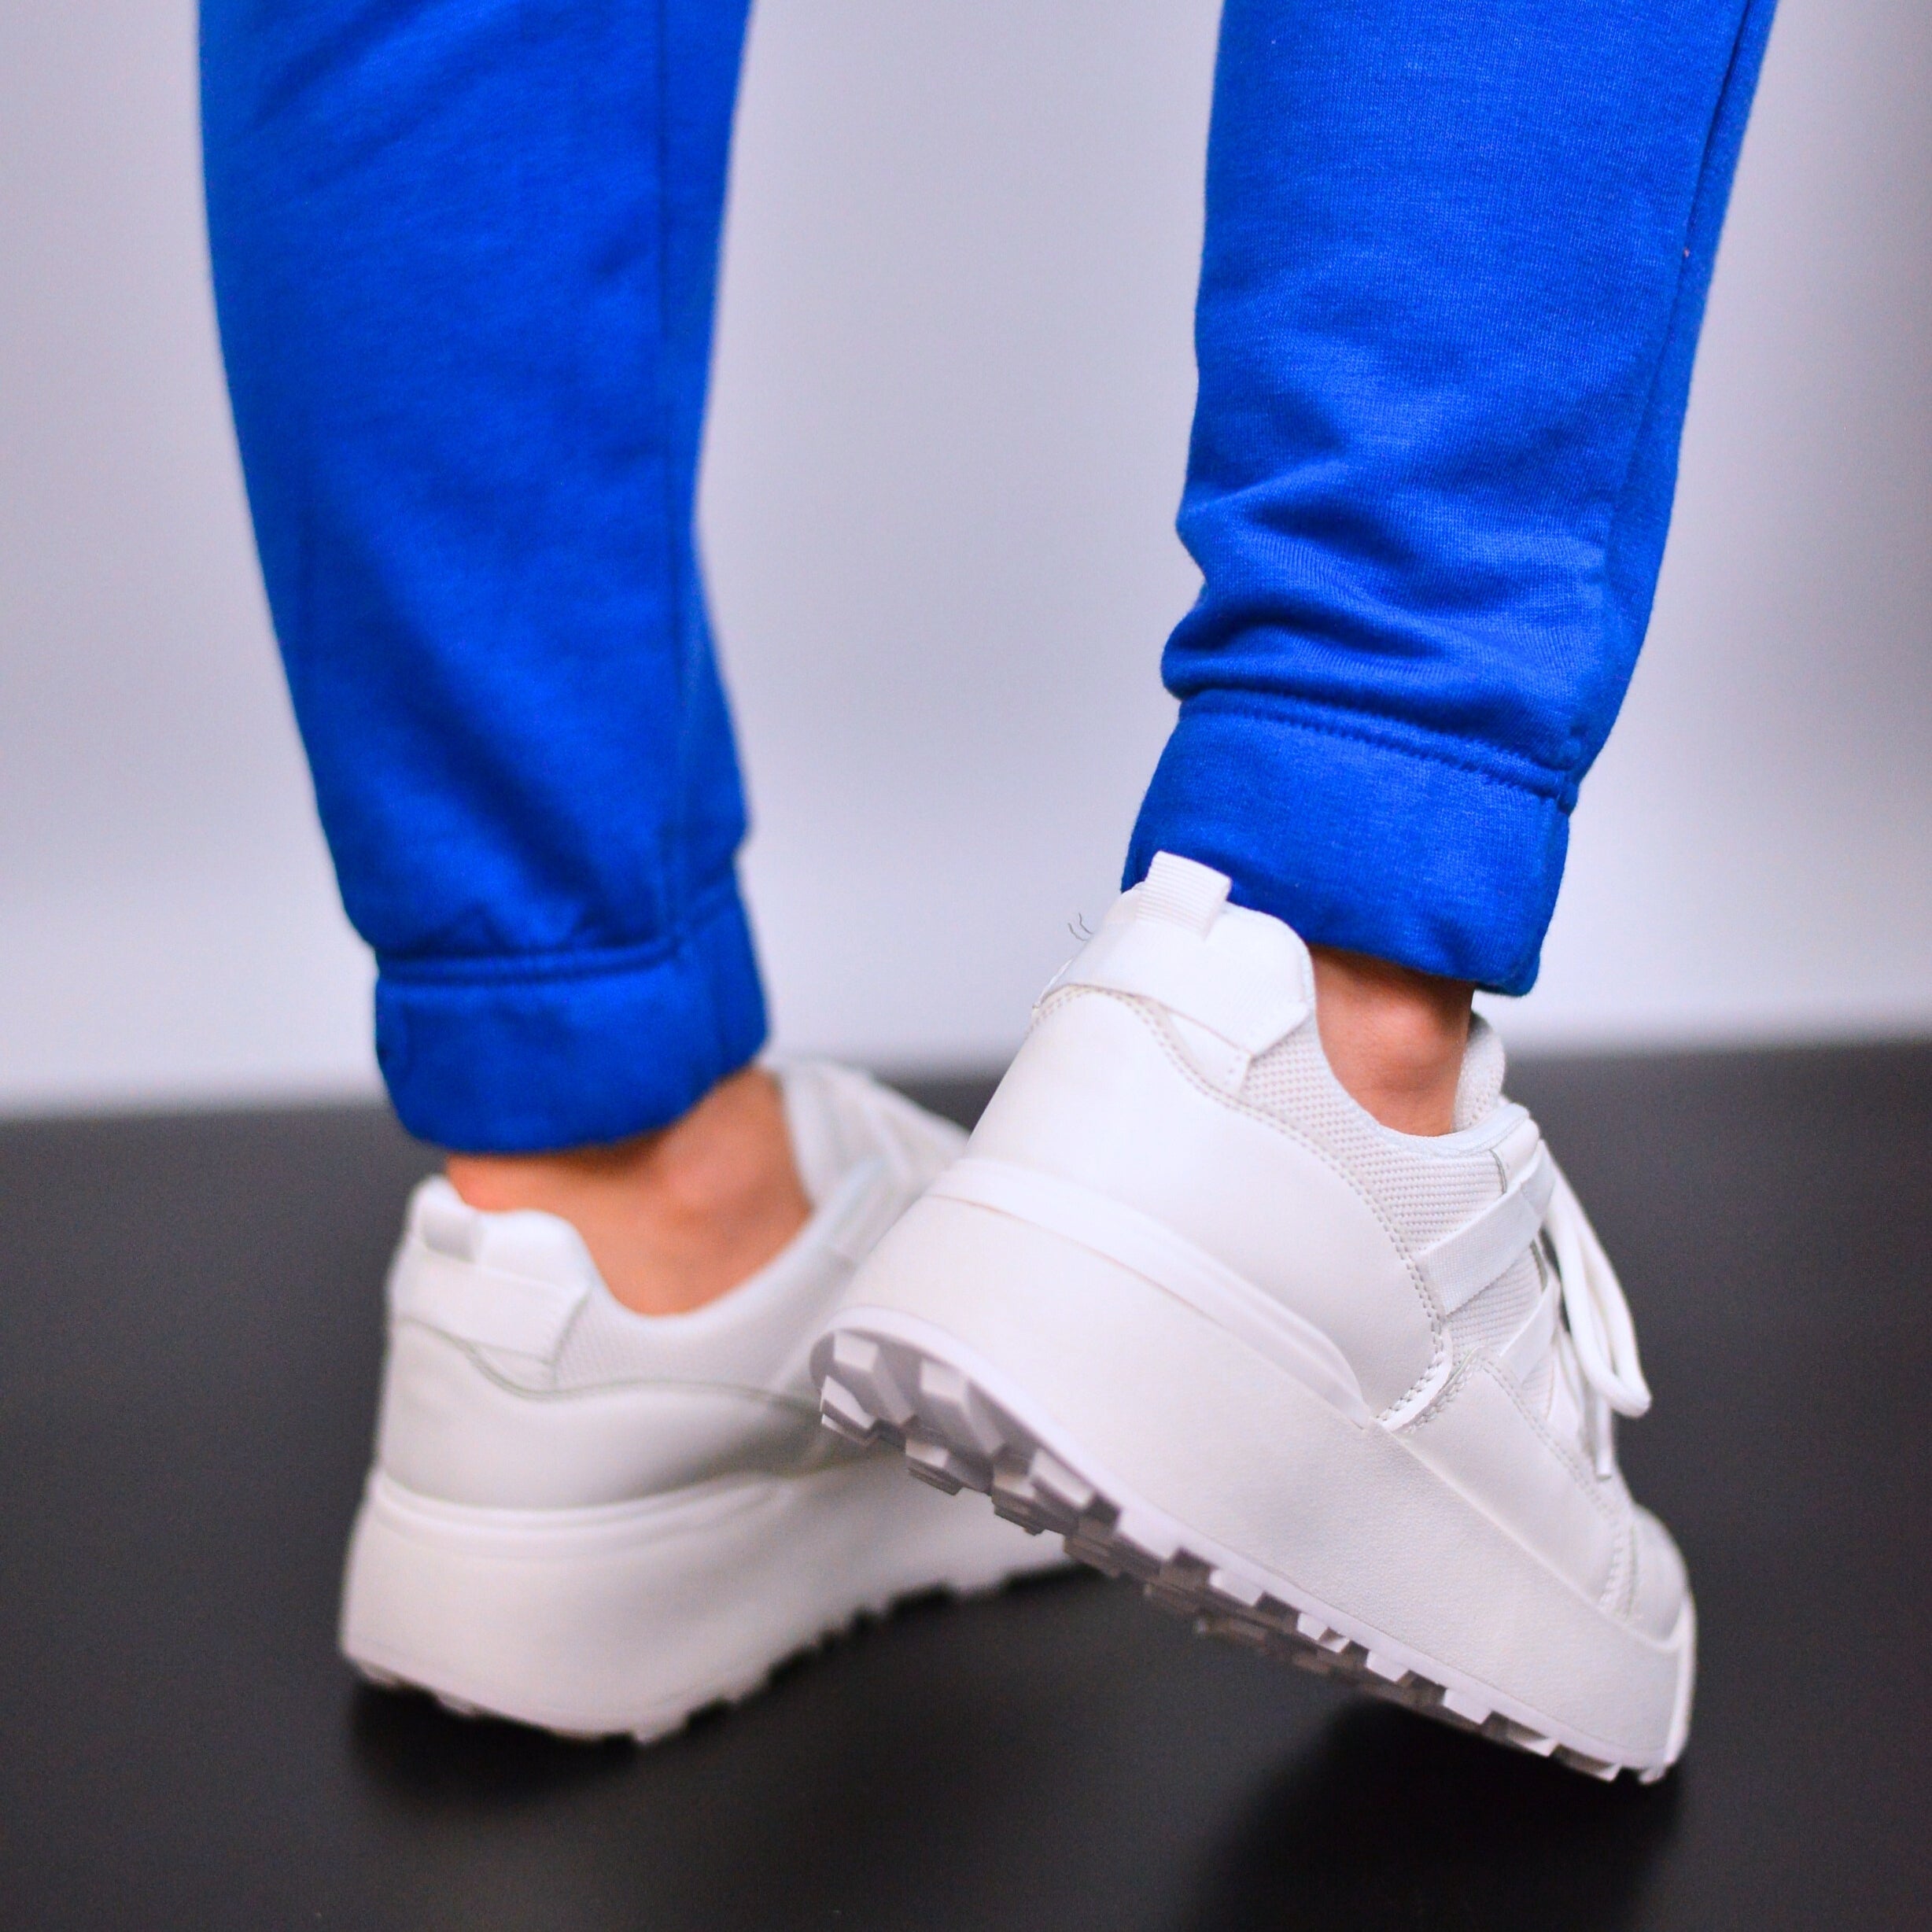 Women's White Irina Sneakers Made Of Textile Material And Ecological Leather